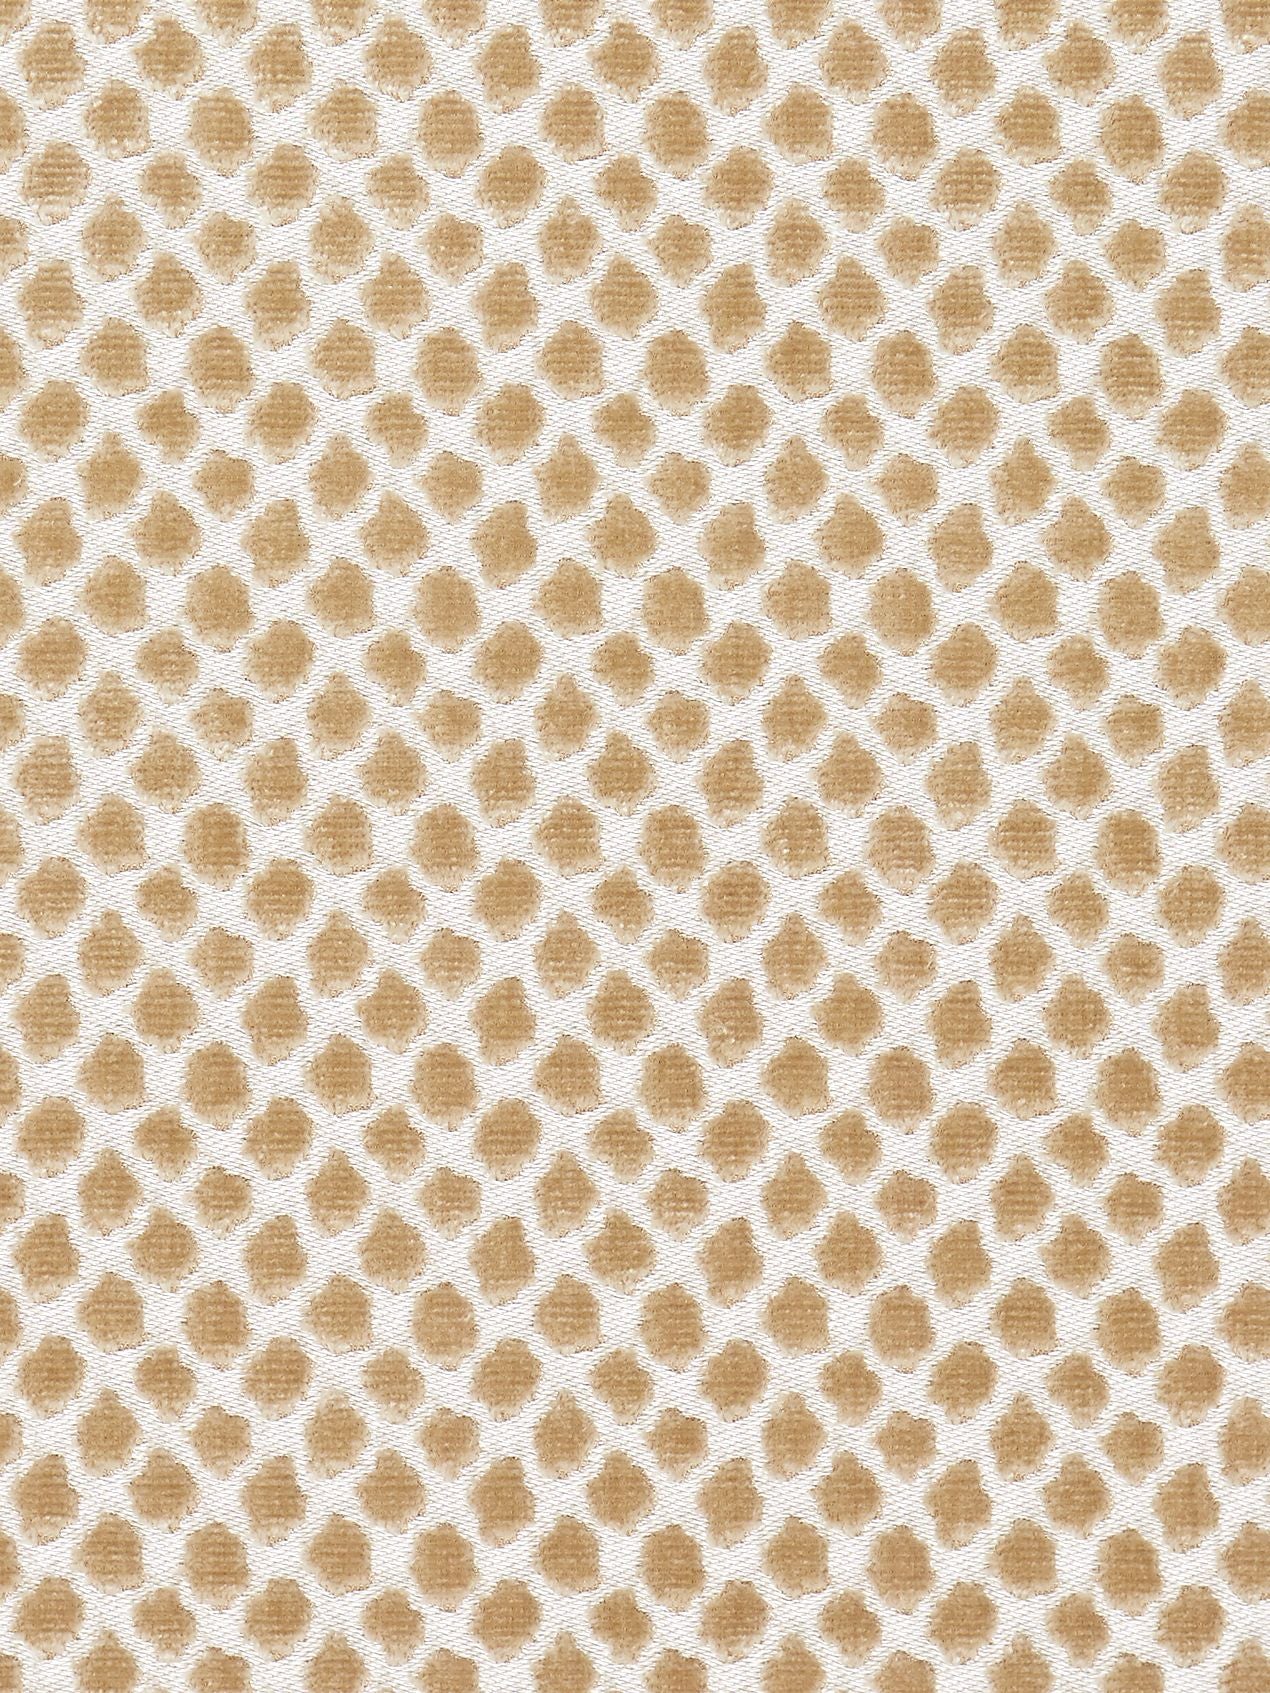 Etosha Velvet fabric in sand color - pattern number SC 000227022 - by Scalamandre in the Scalamandre Fabrics Book 1 collection